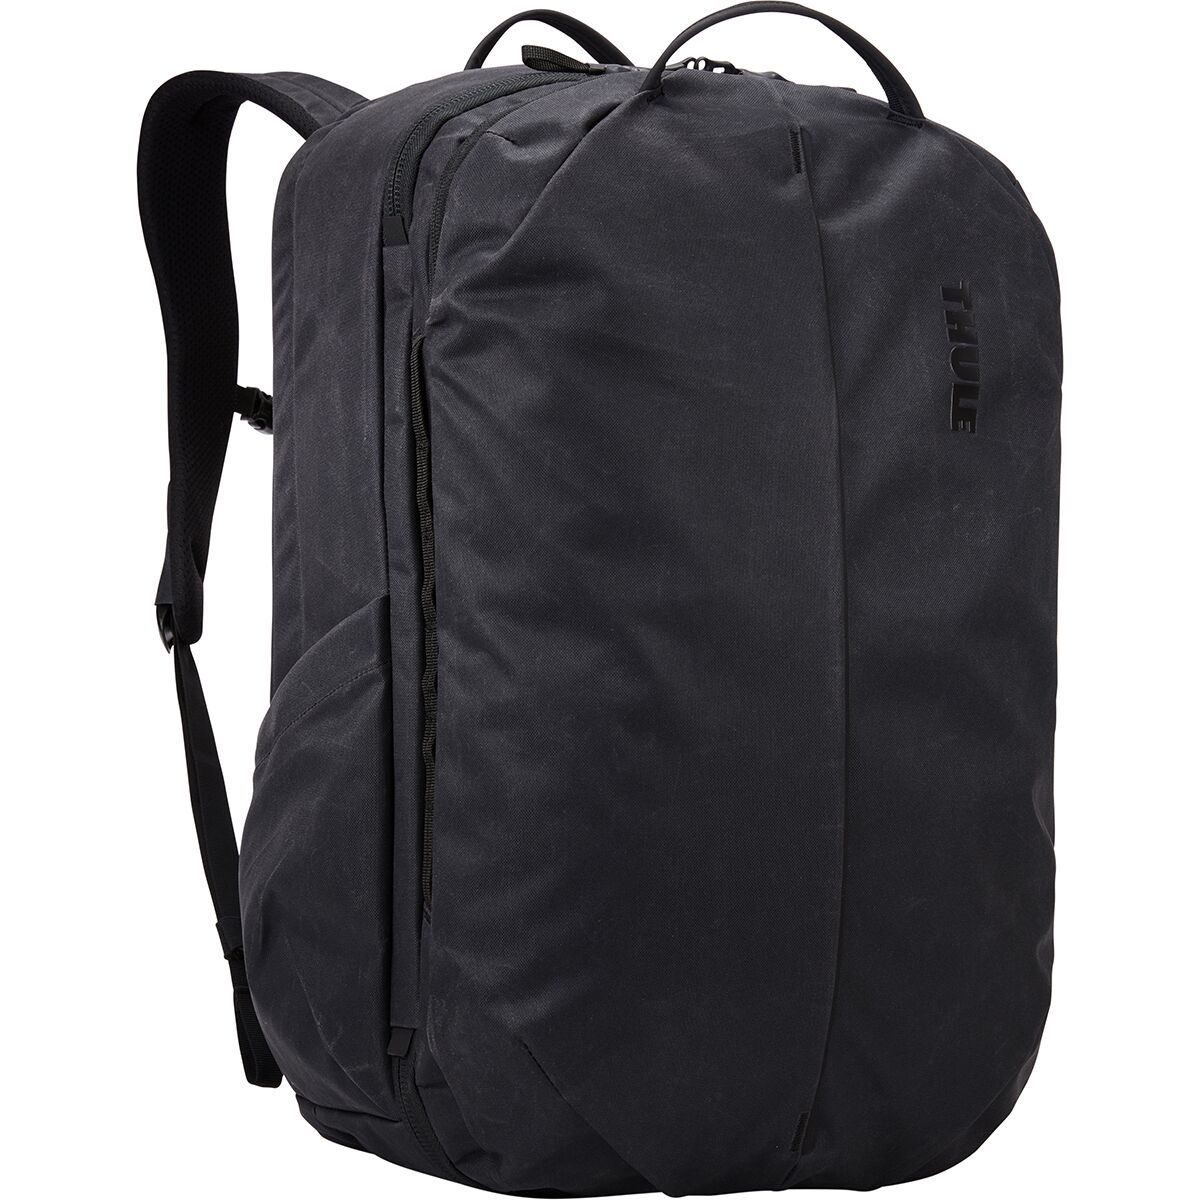 Thule Aion 40L Backpack